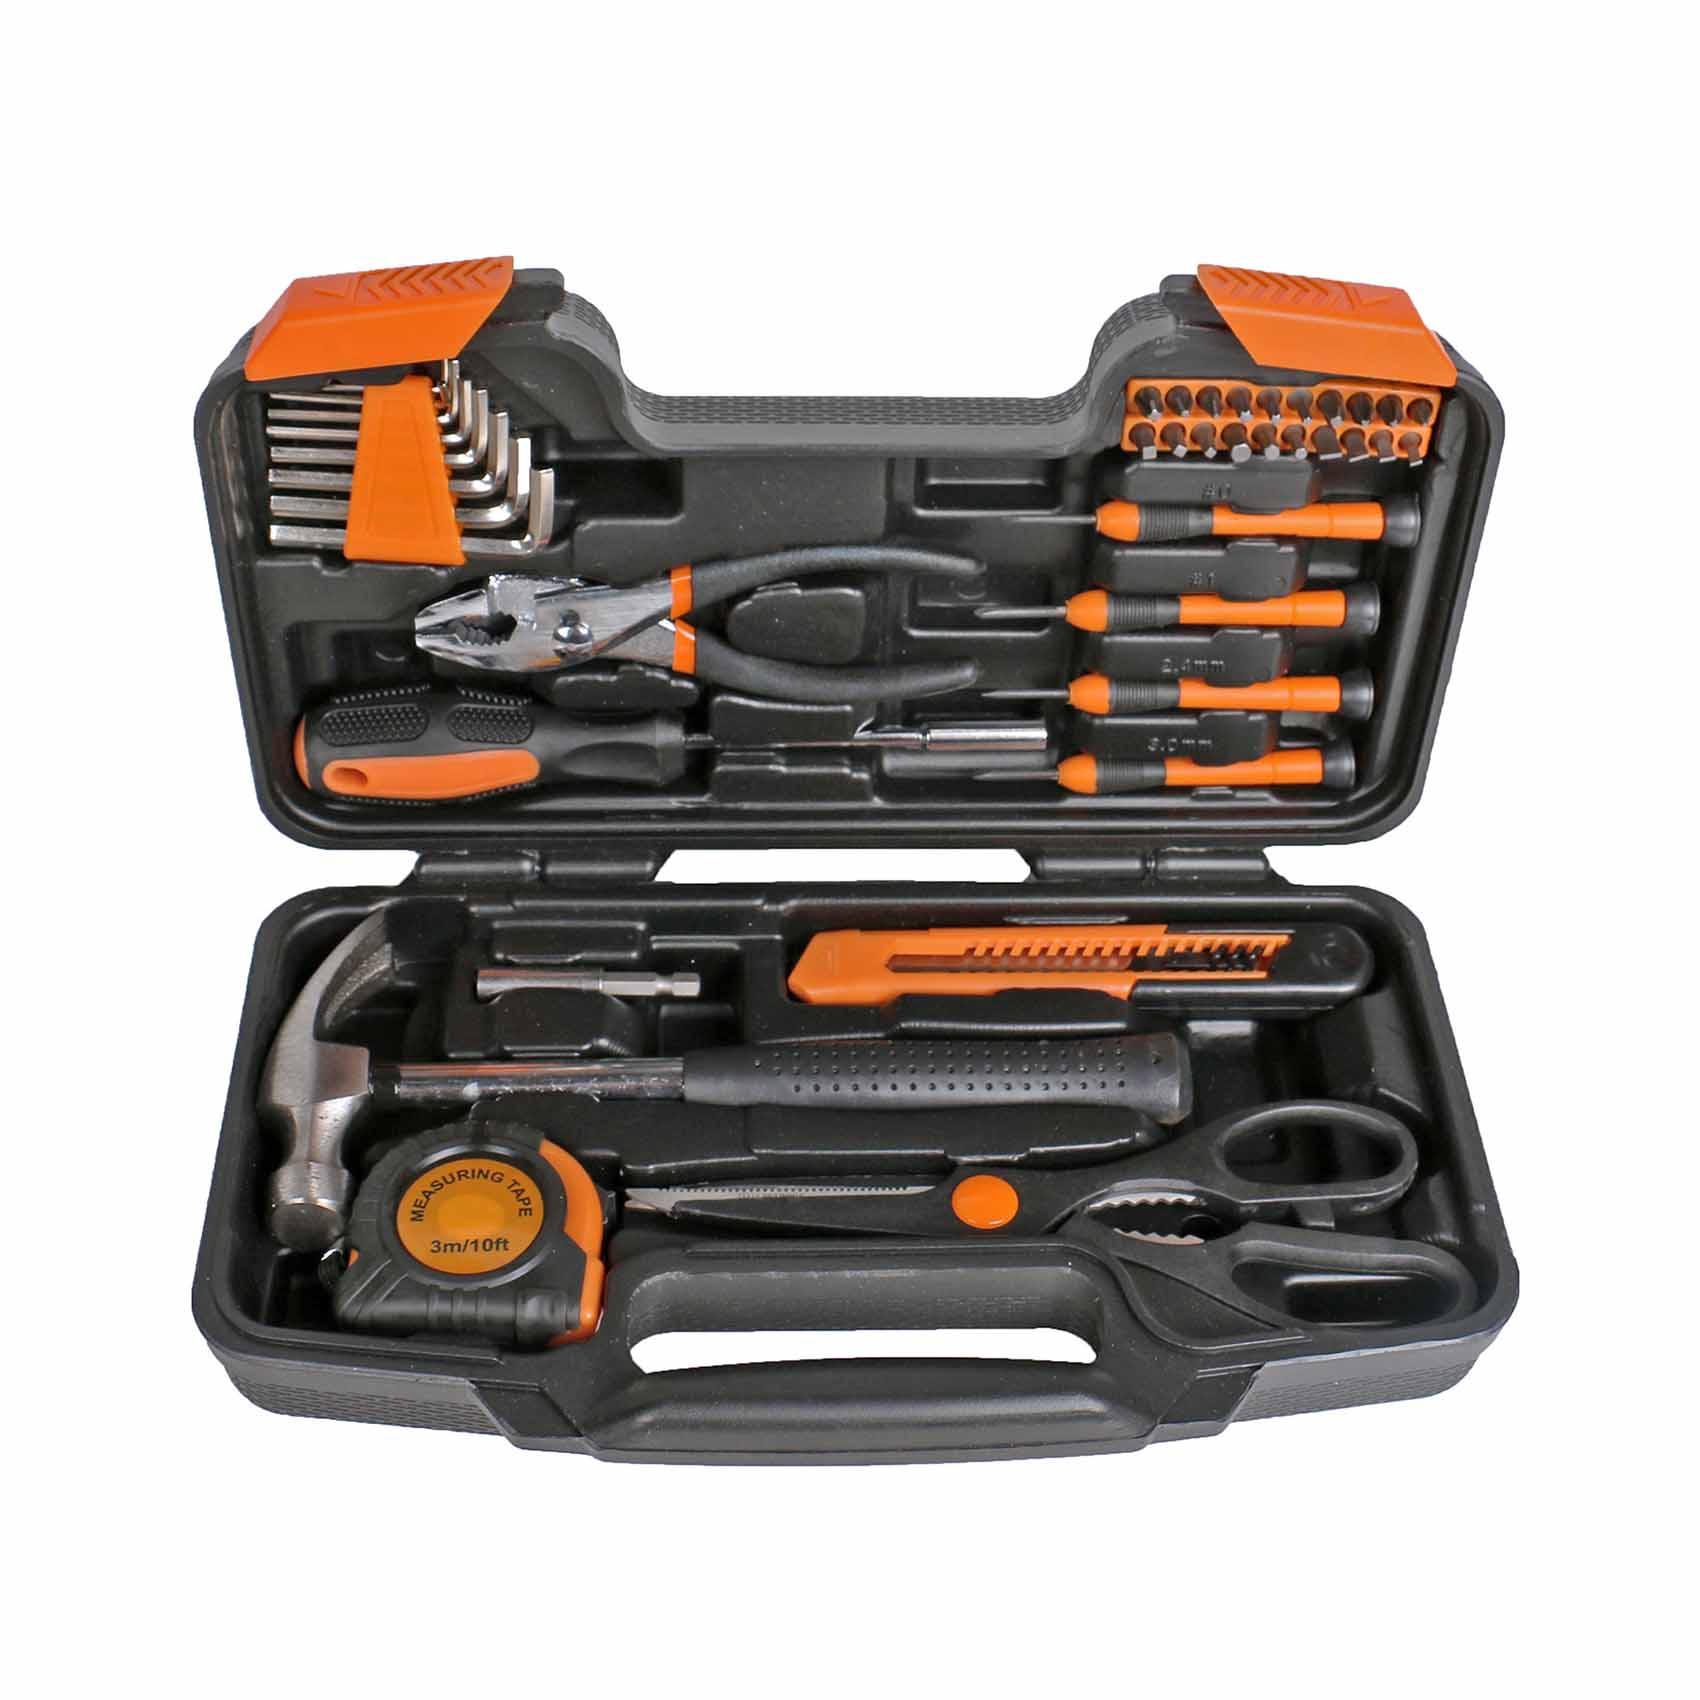 Find the Top Tools Suppliers in Middle East, Dubai & UAE - GOLDEN TOOLS